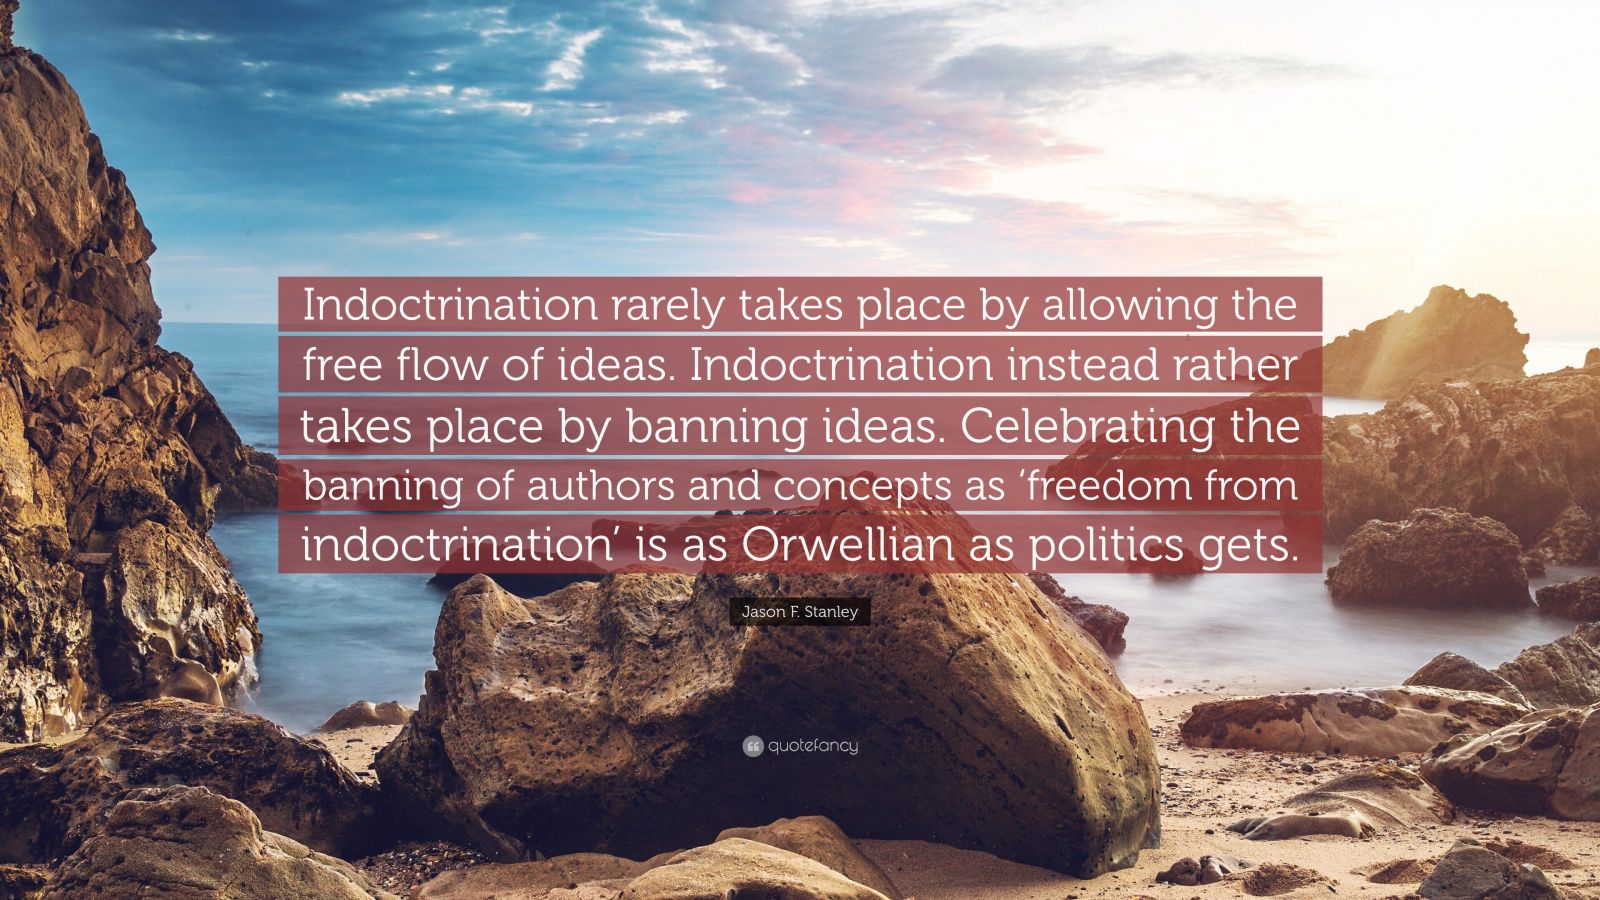 Jason F. Stanley Quote: “Indoctrination rarely takes place by allowing ...